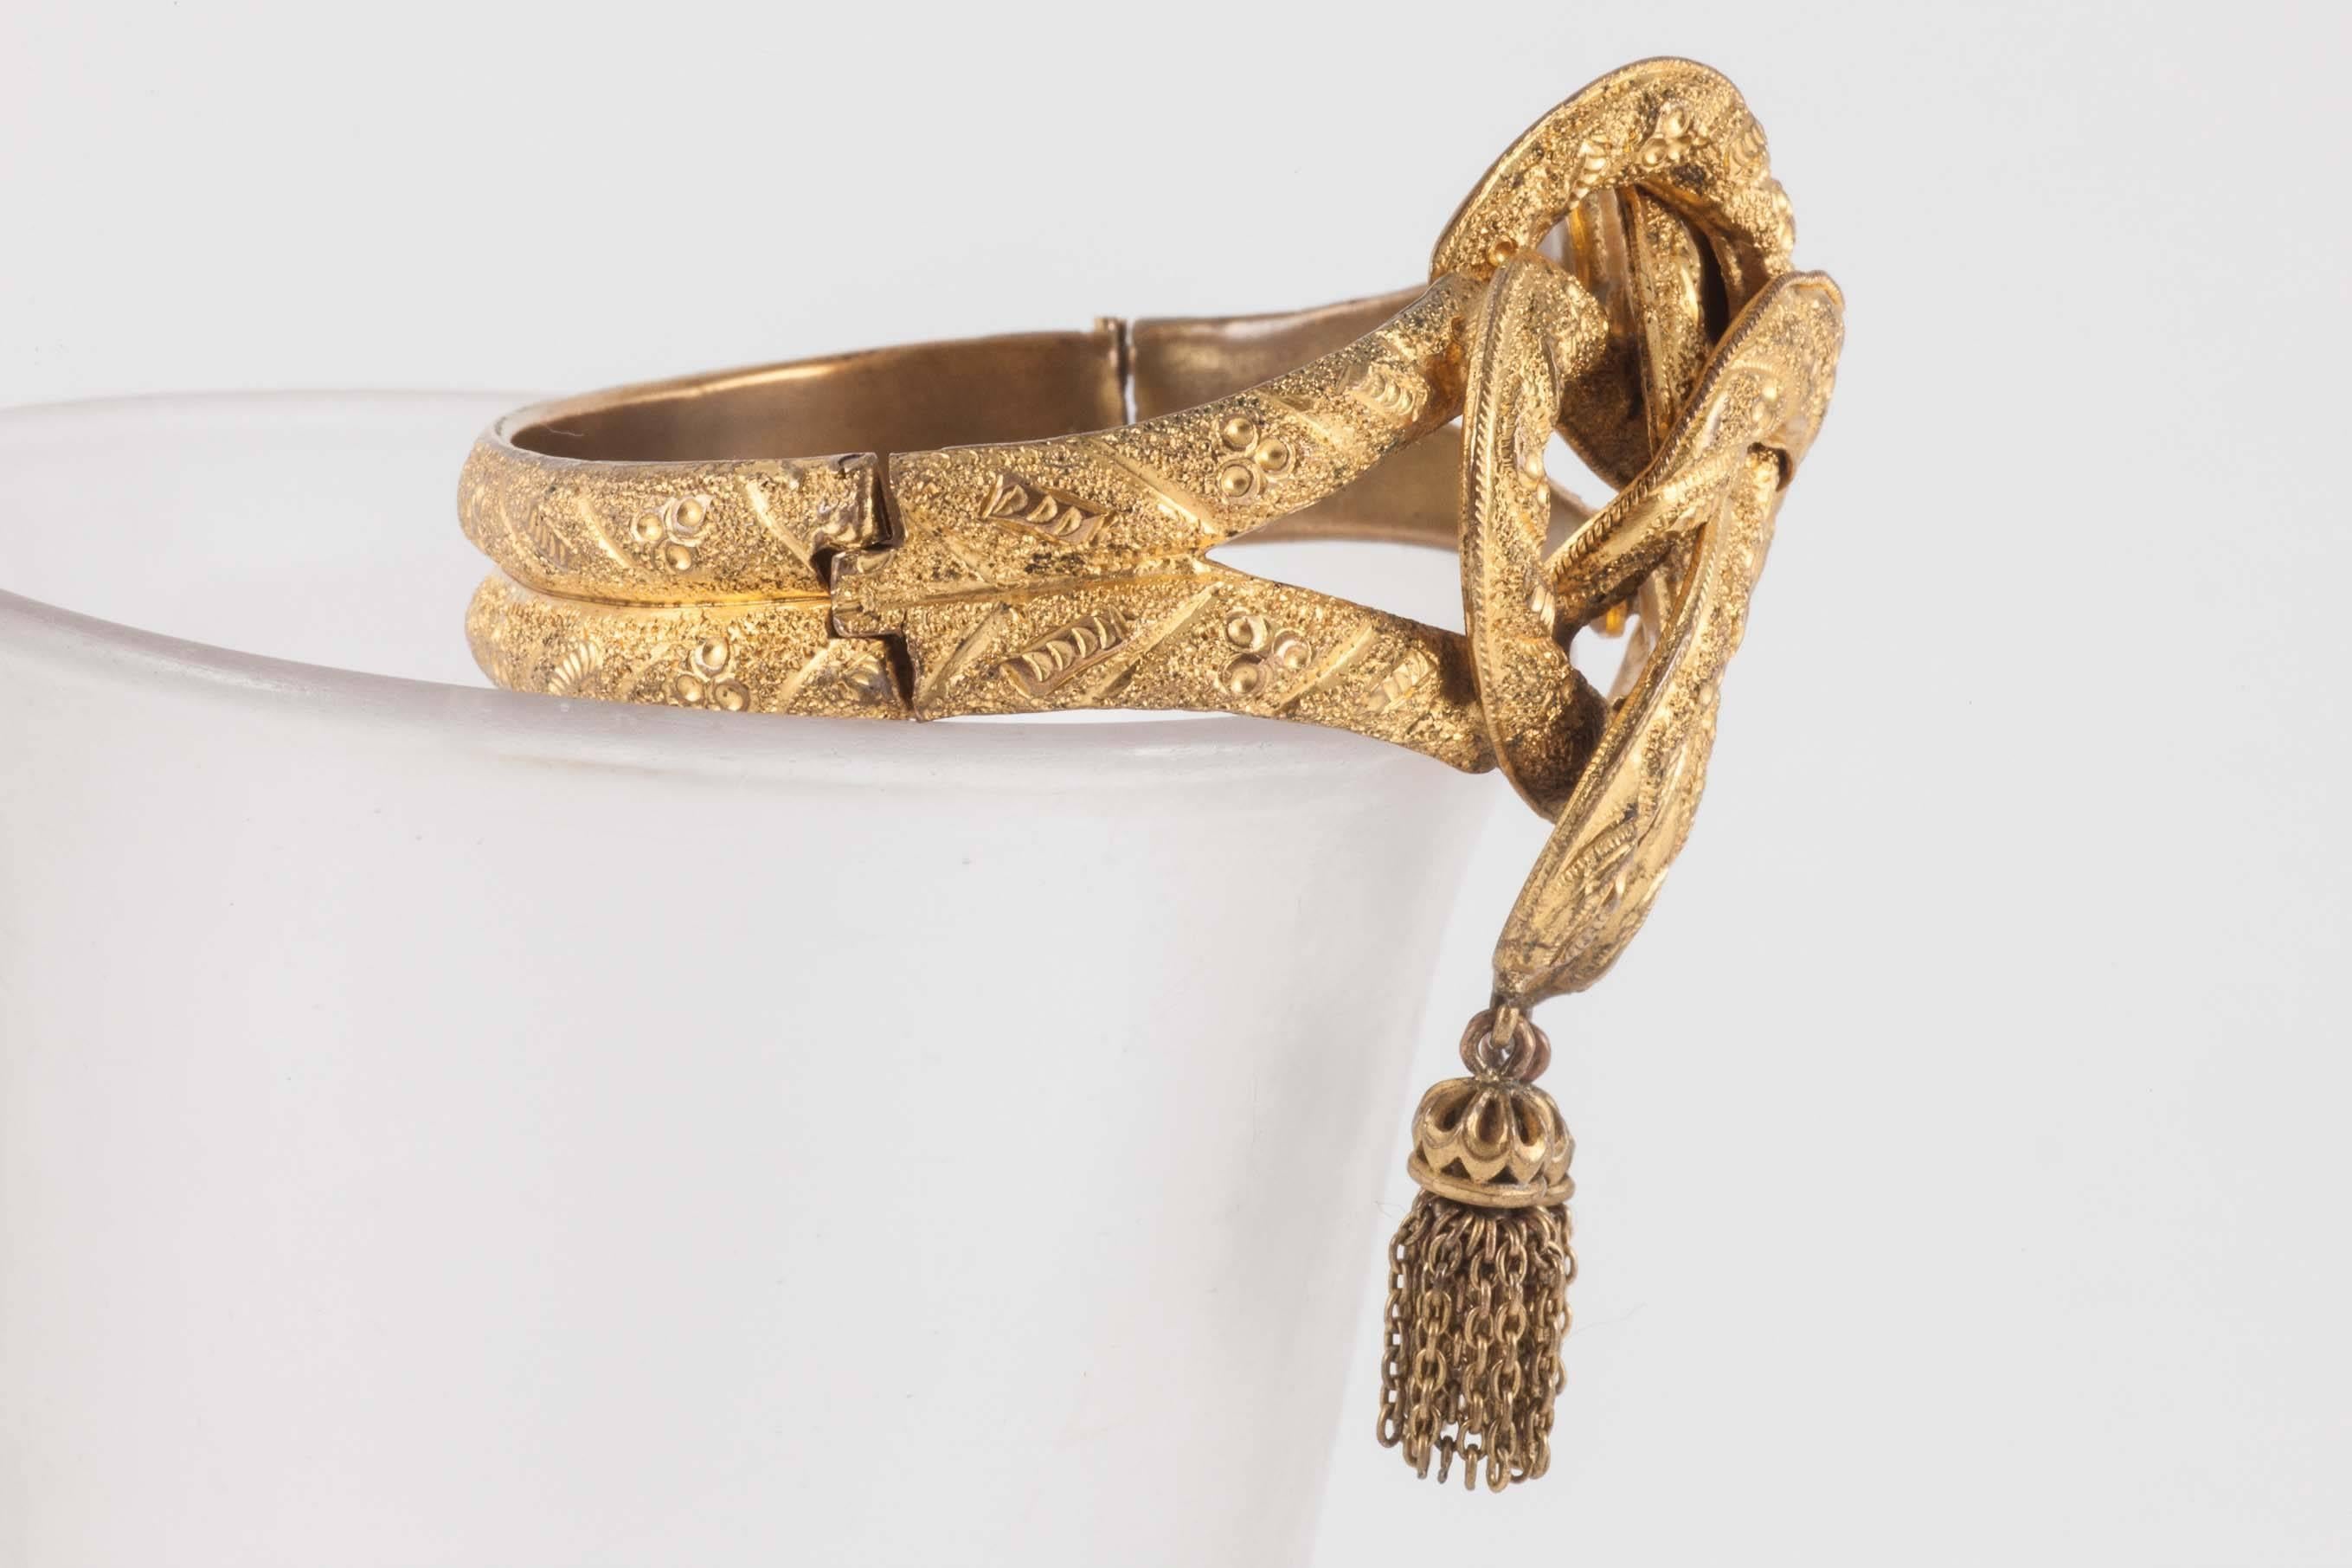 Bracelets of this form were very fashionable in the early years of Queen Victoria's reign. She wore a knotted snake bracelet to her first council meeting at Kensington Palace in 1837. No doubt this lovely survival was a copy of a gold version. It is